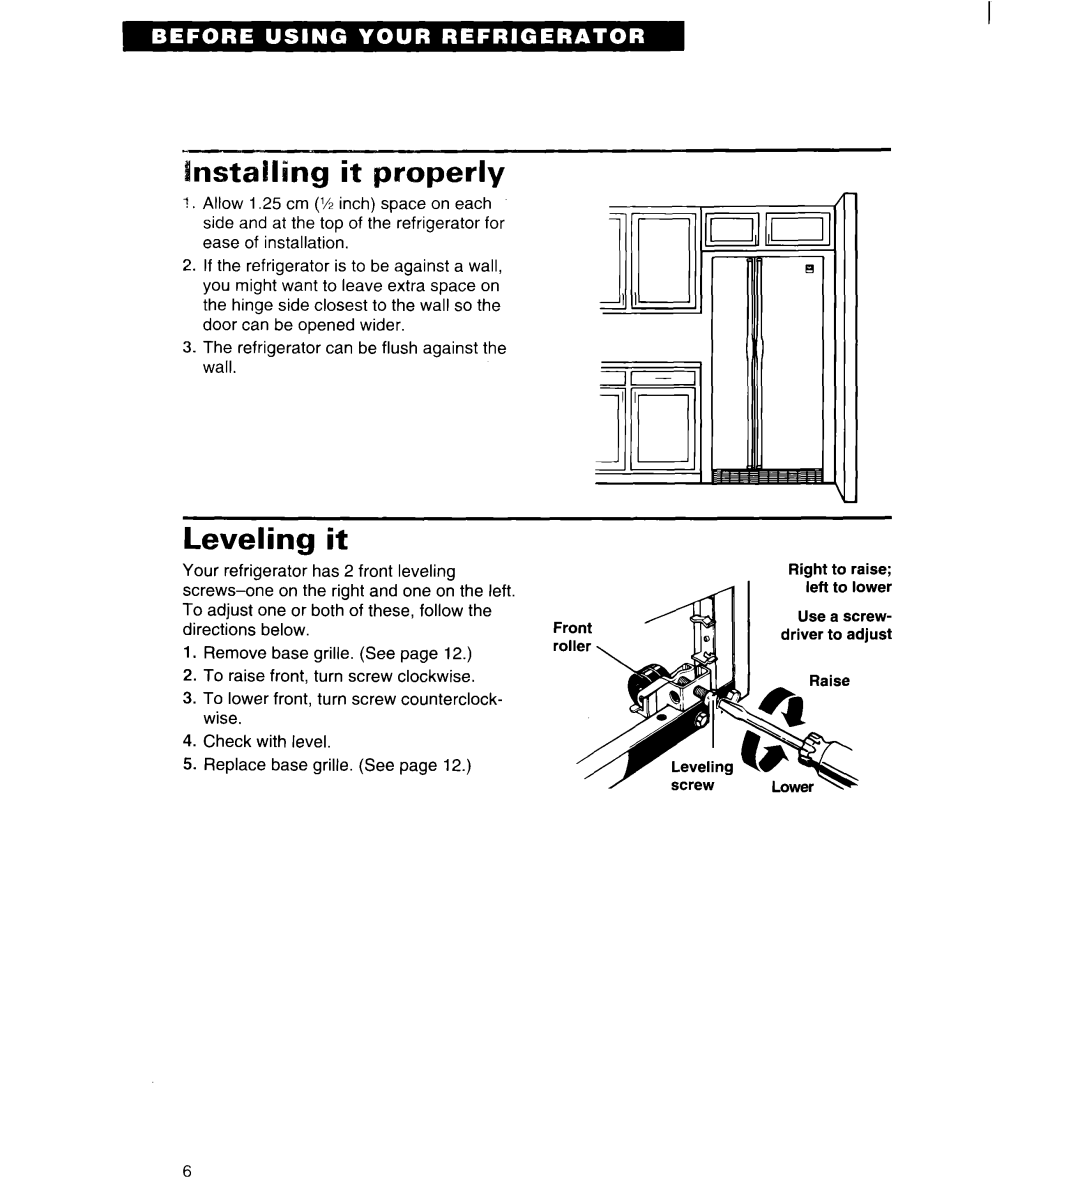 Whirlpool 4ED20ZK important safety instructions nstalling it properly, Leveling it 